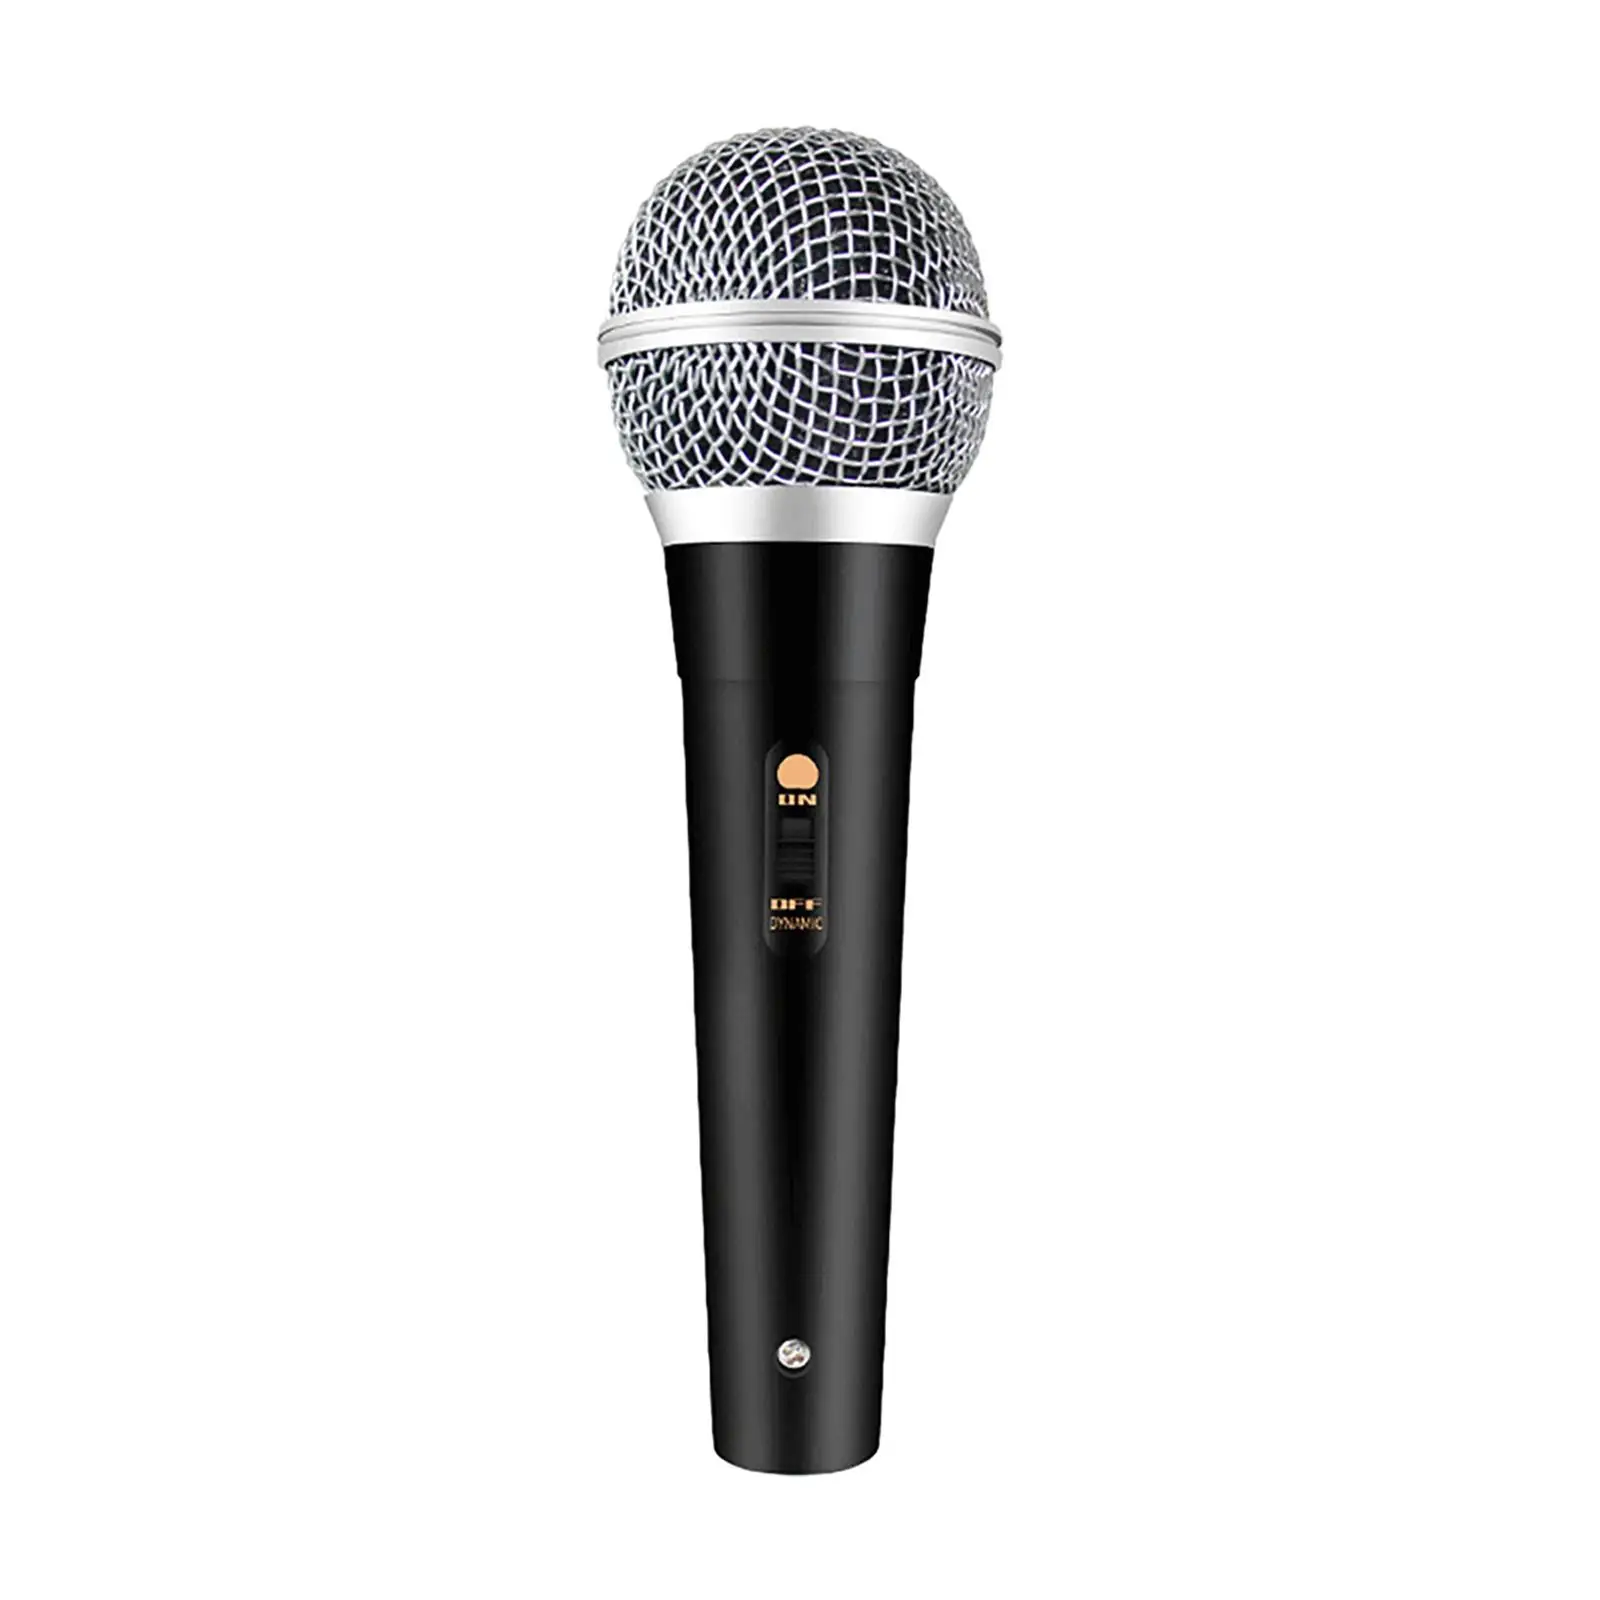 Handheld Wired Dynamic Mic Microphone Cardioid Pickup Pattern with on and Off Switch 300cm Cord for Wedding DJ Lightweight